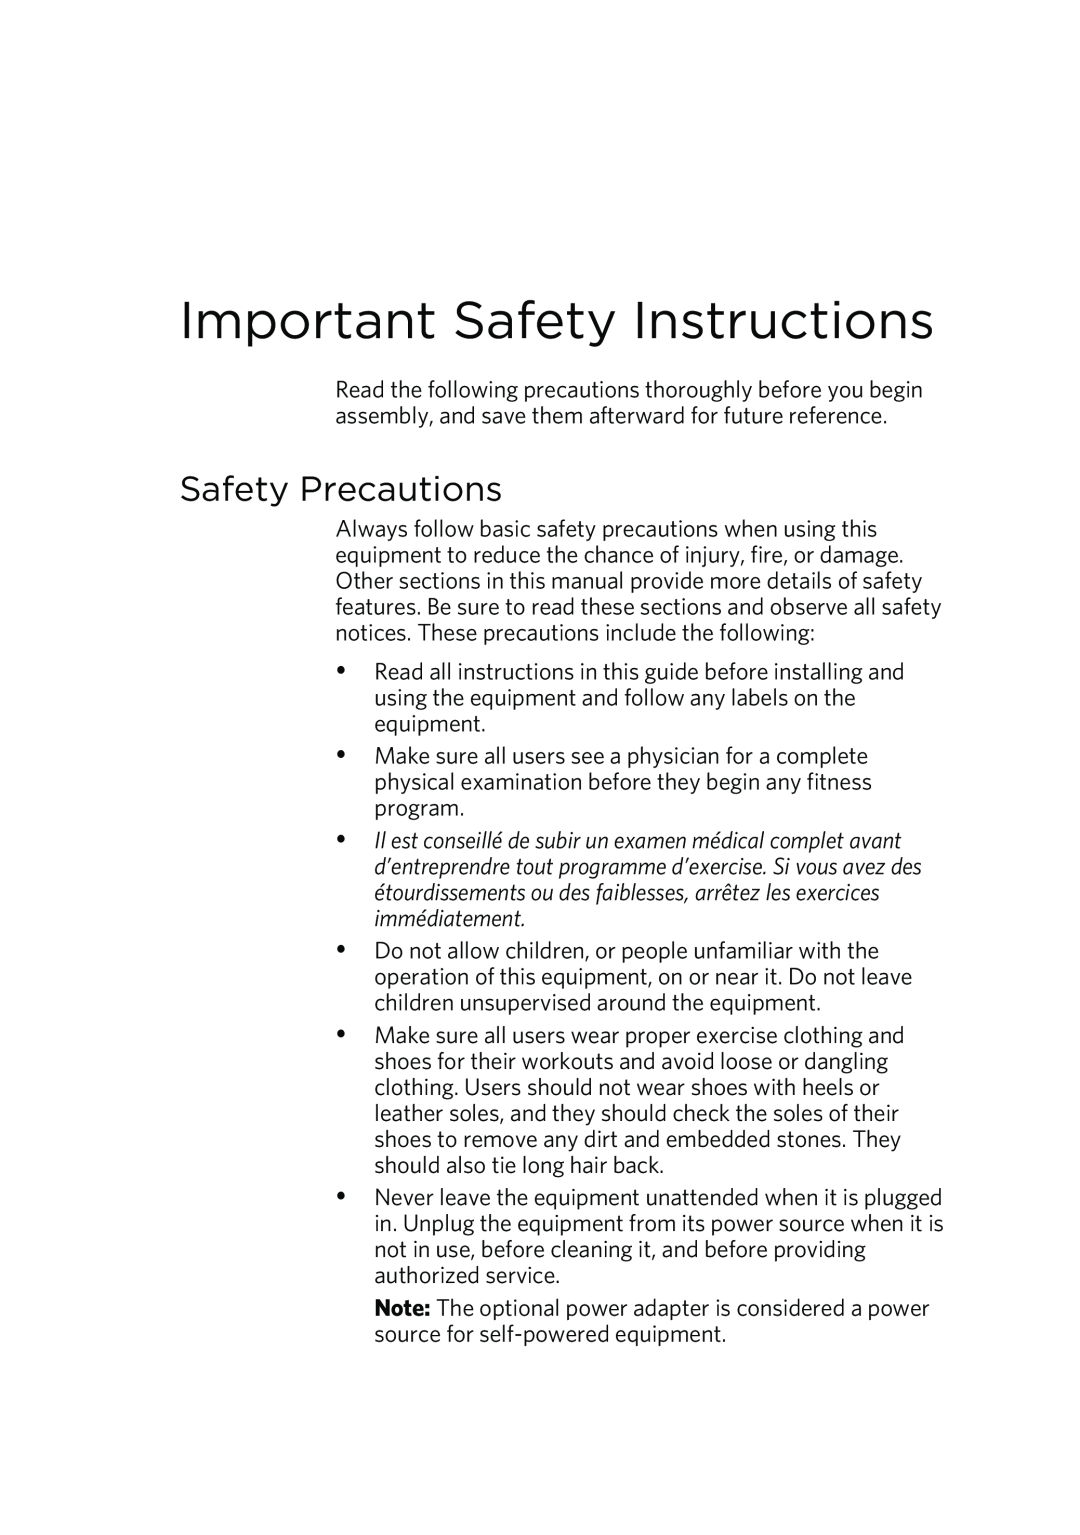 Precor P80 manual Important Safety Instructions, Safety Precautions 